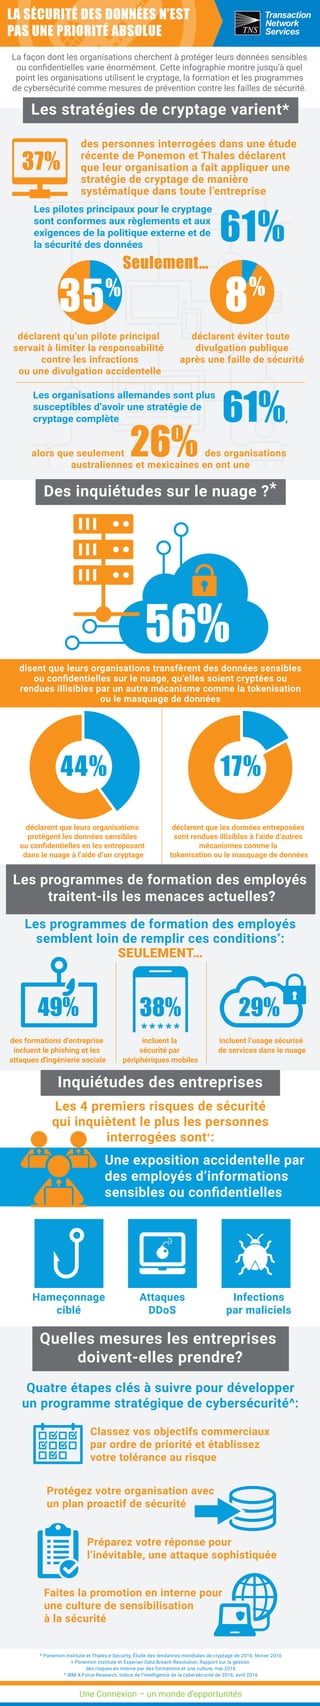 TNS Data Breach Priority Infographic - French